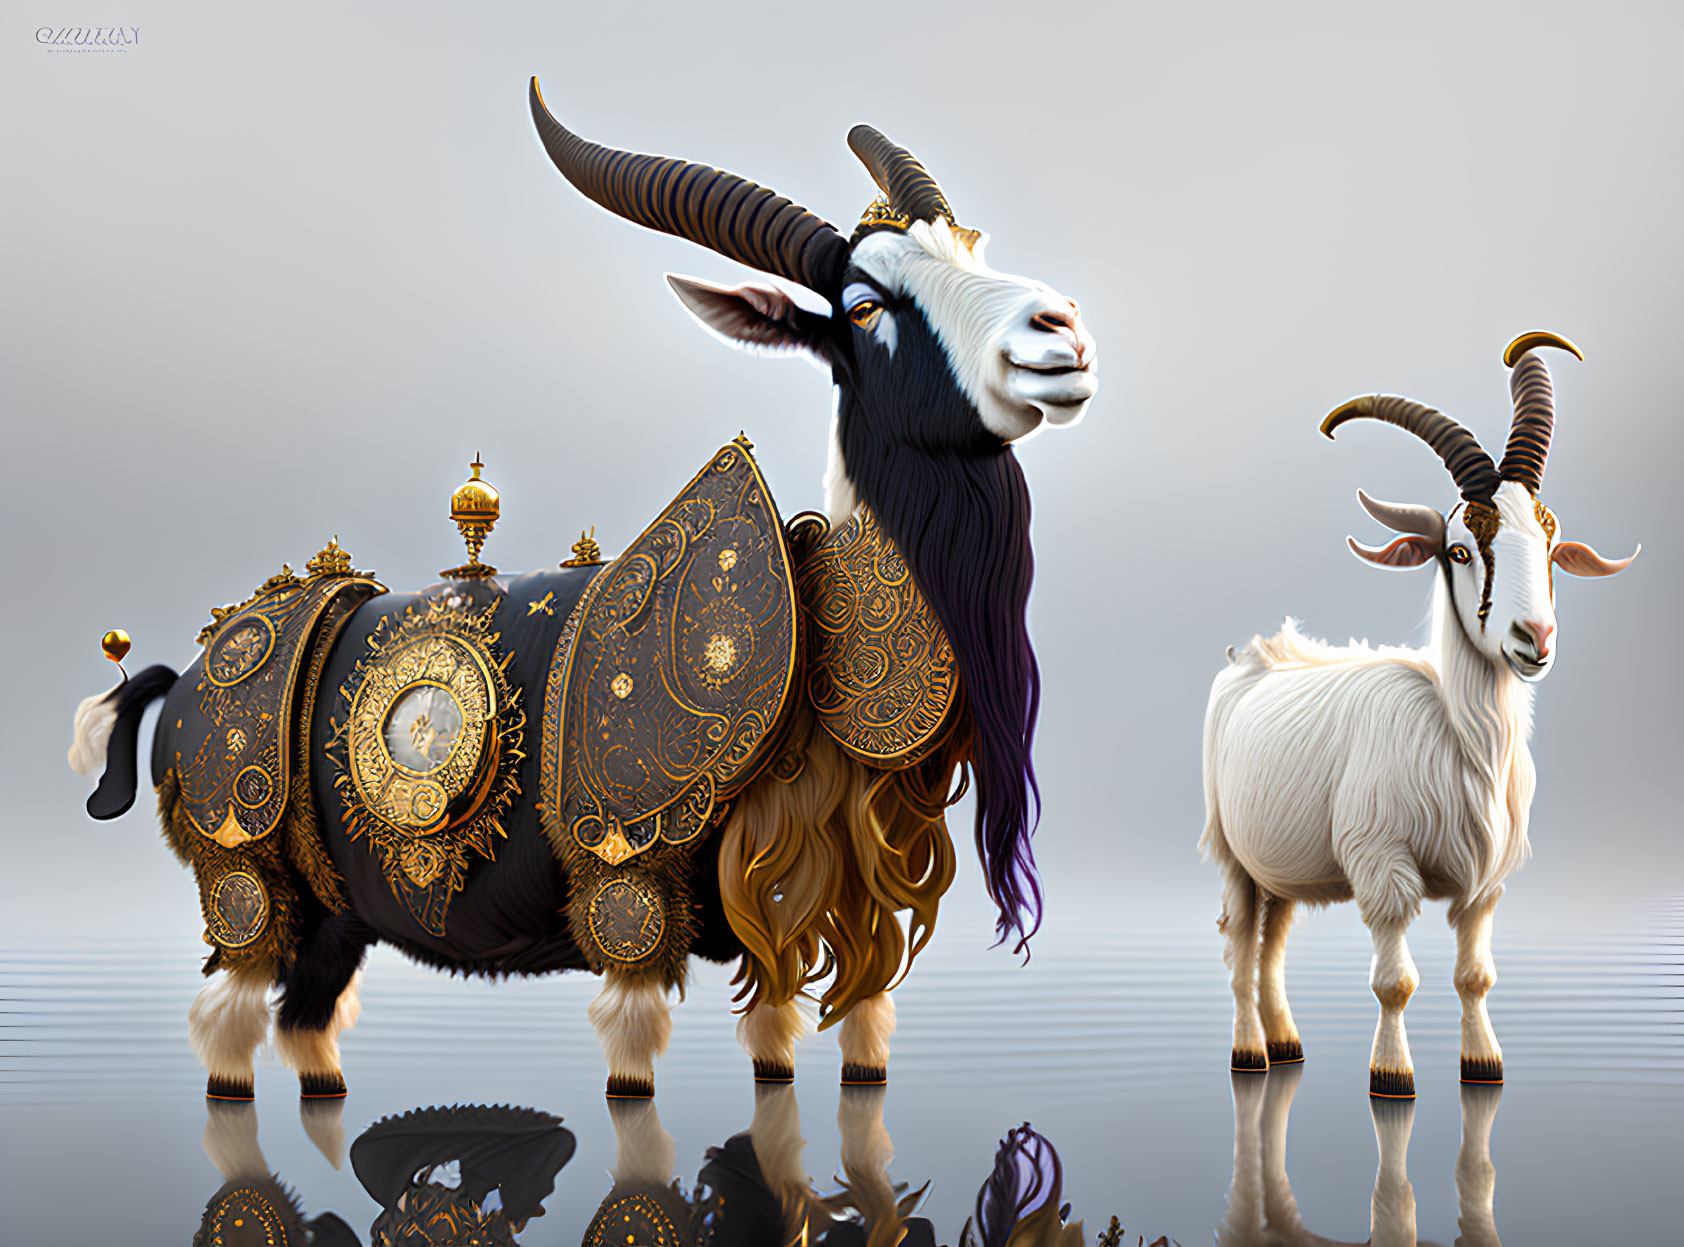 Digital artwork featuring two goats with decorative saddle and accessories, standing on shiny surface